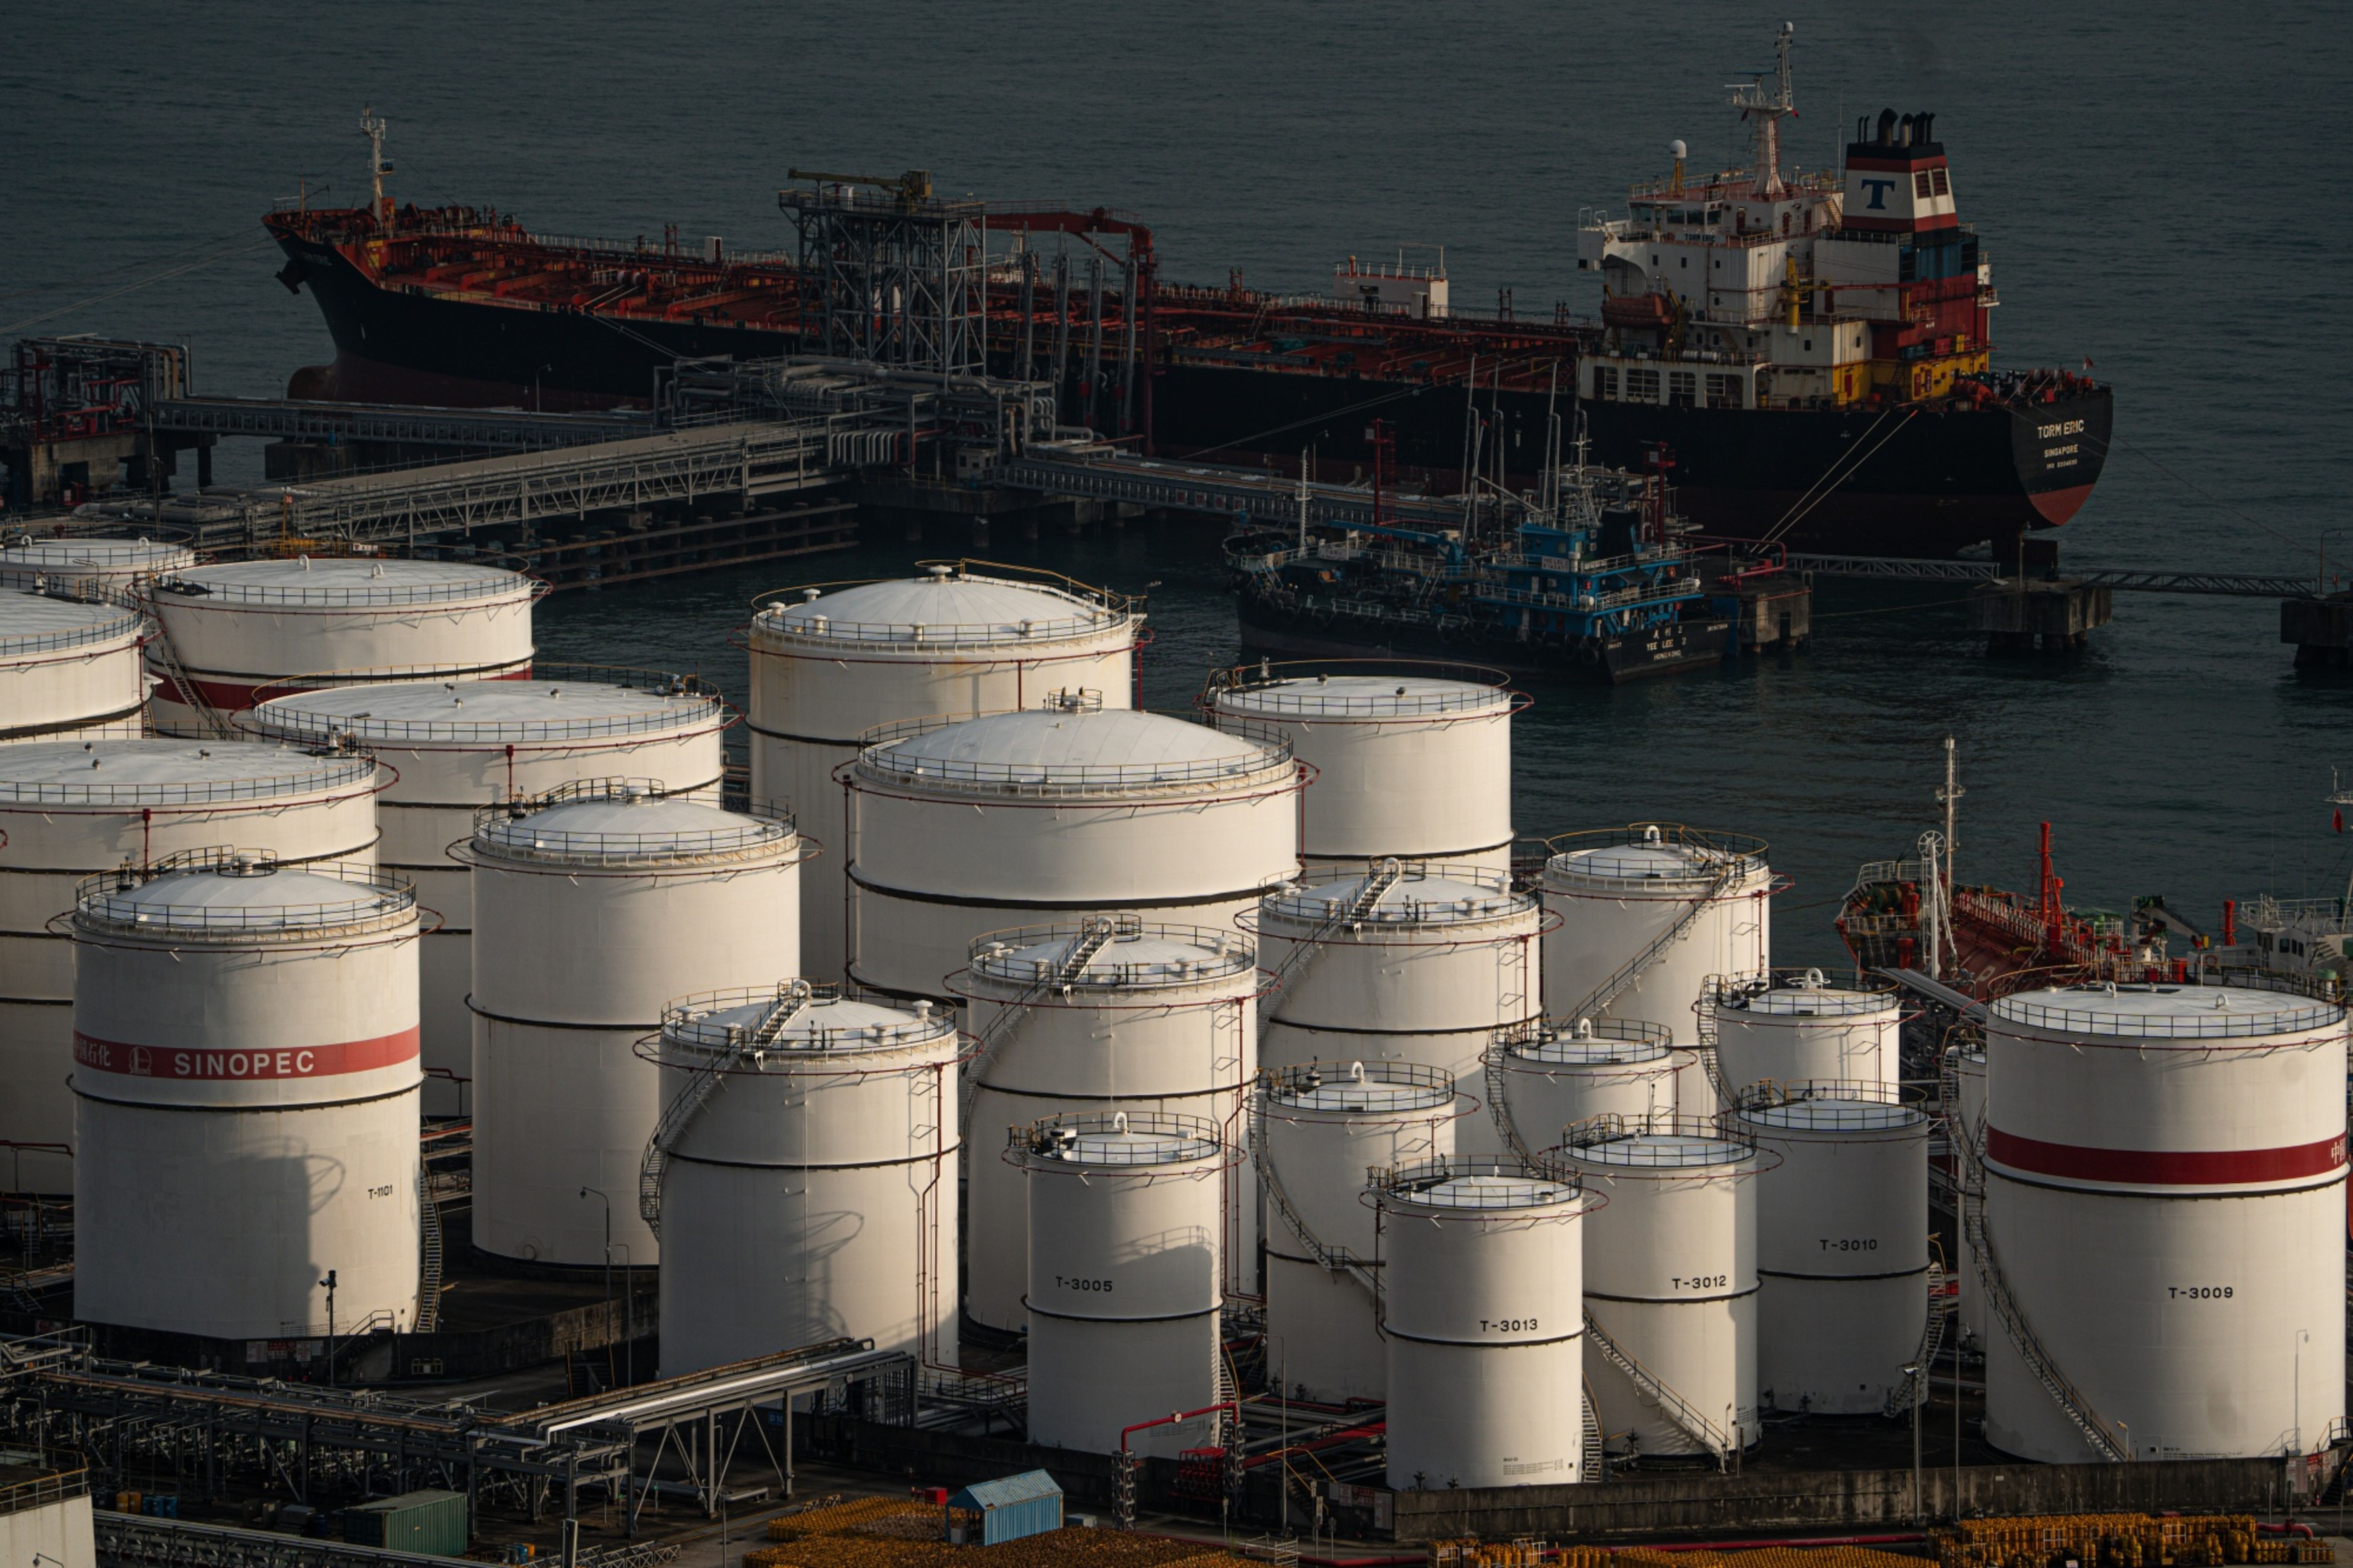 Sinopec storage tanks sit at a container terminal in Hong Kong on Nov. 14. Photo: Bloomberg